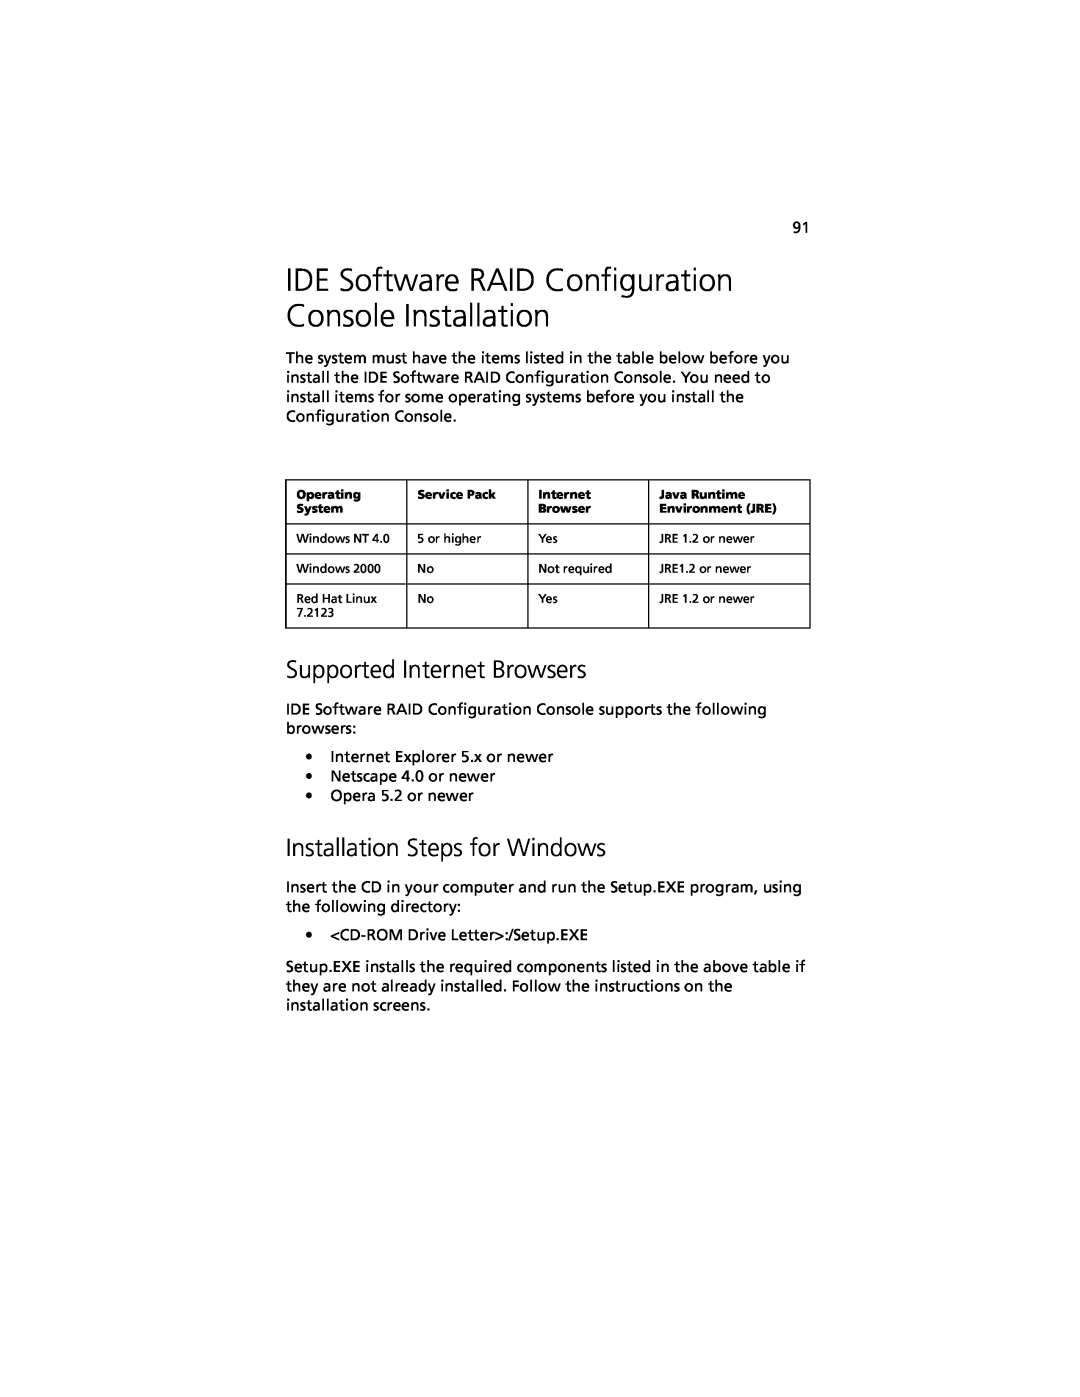 Acer G301 manual Supported Internet Browsers, Installation Steps for Windows 